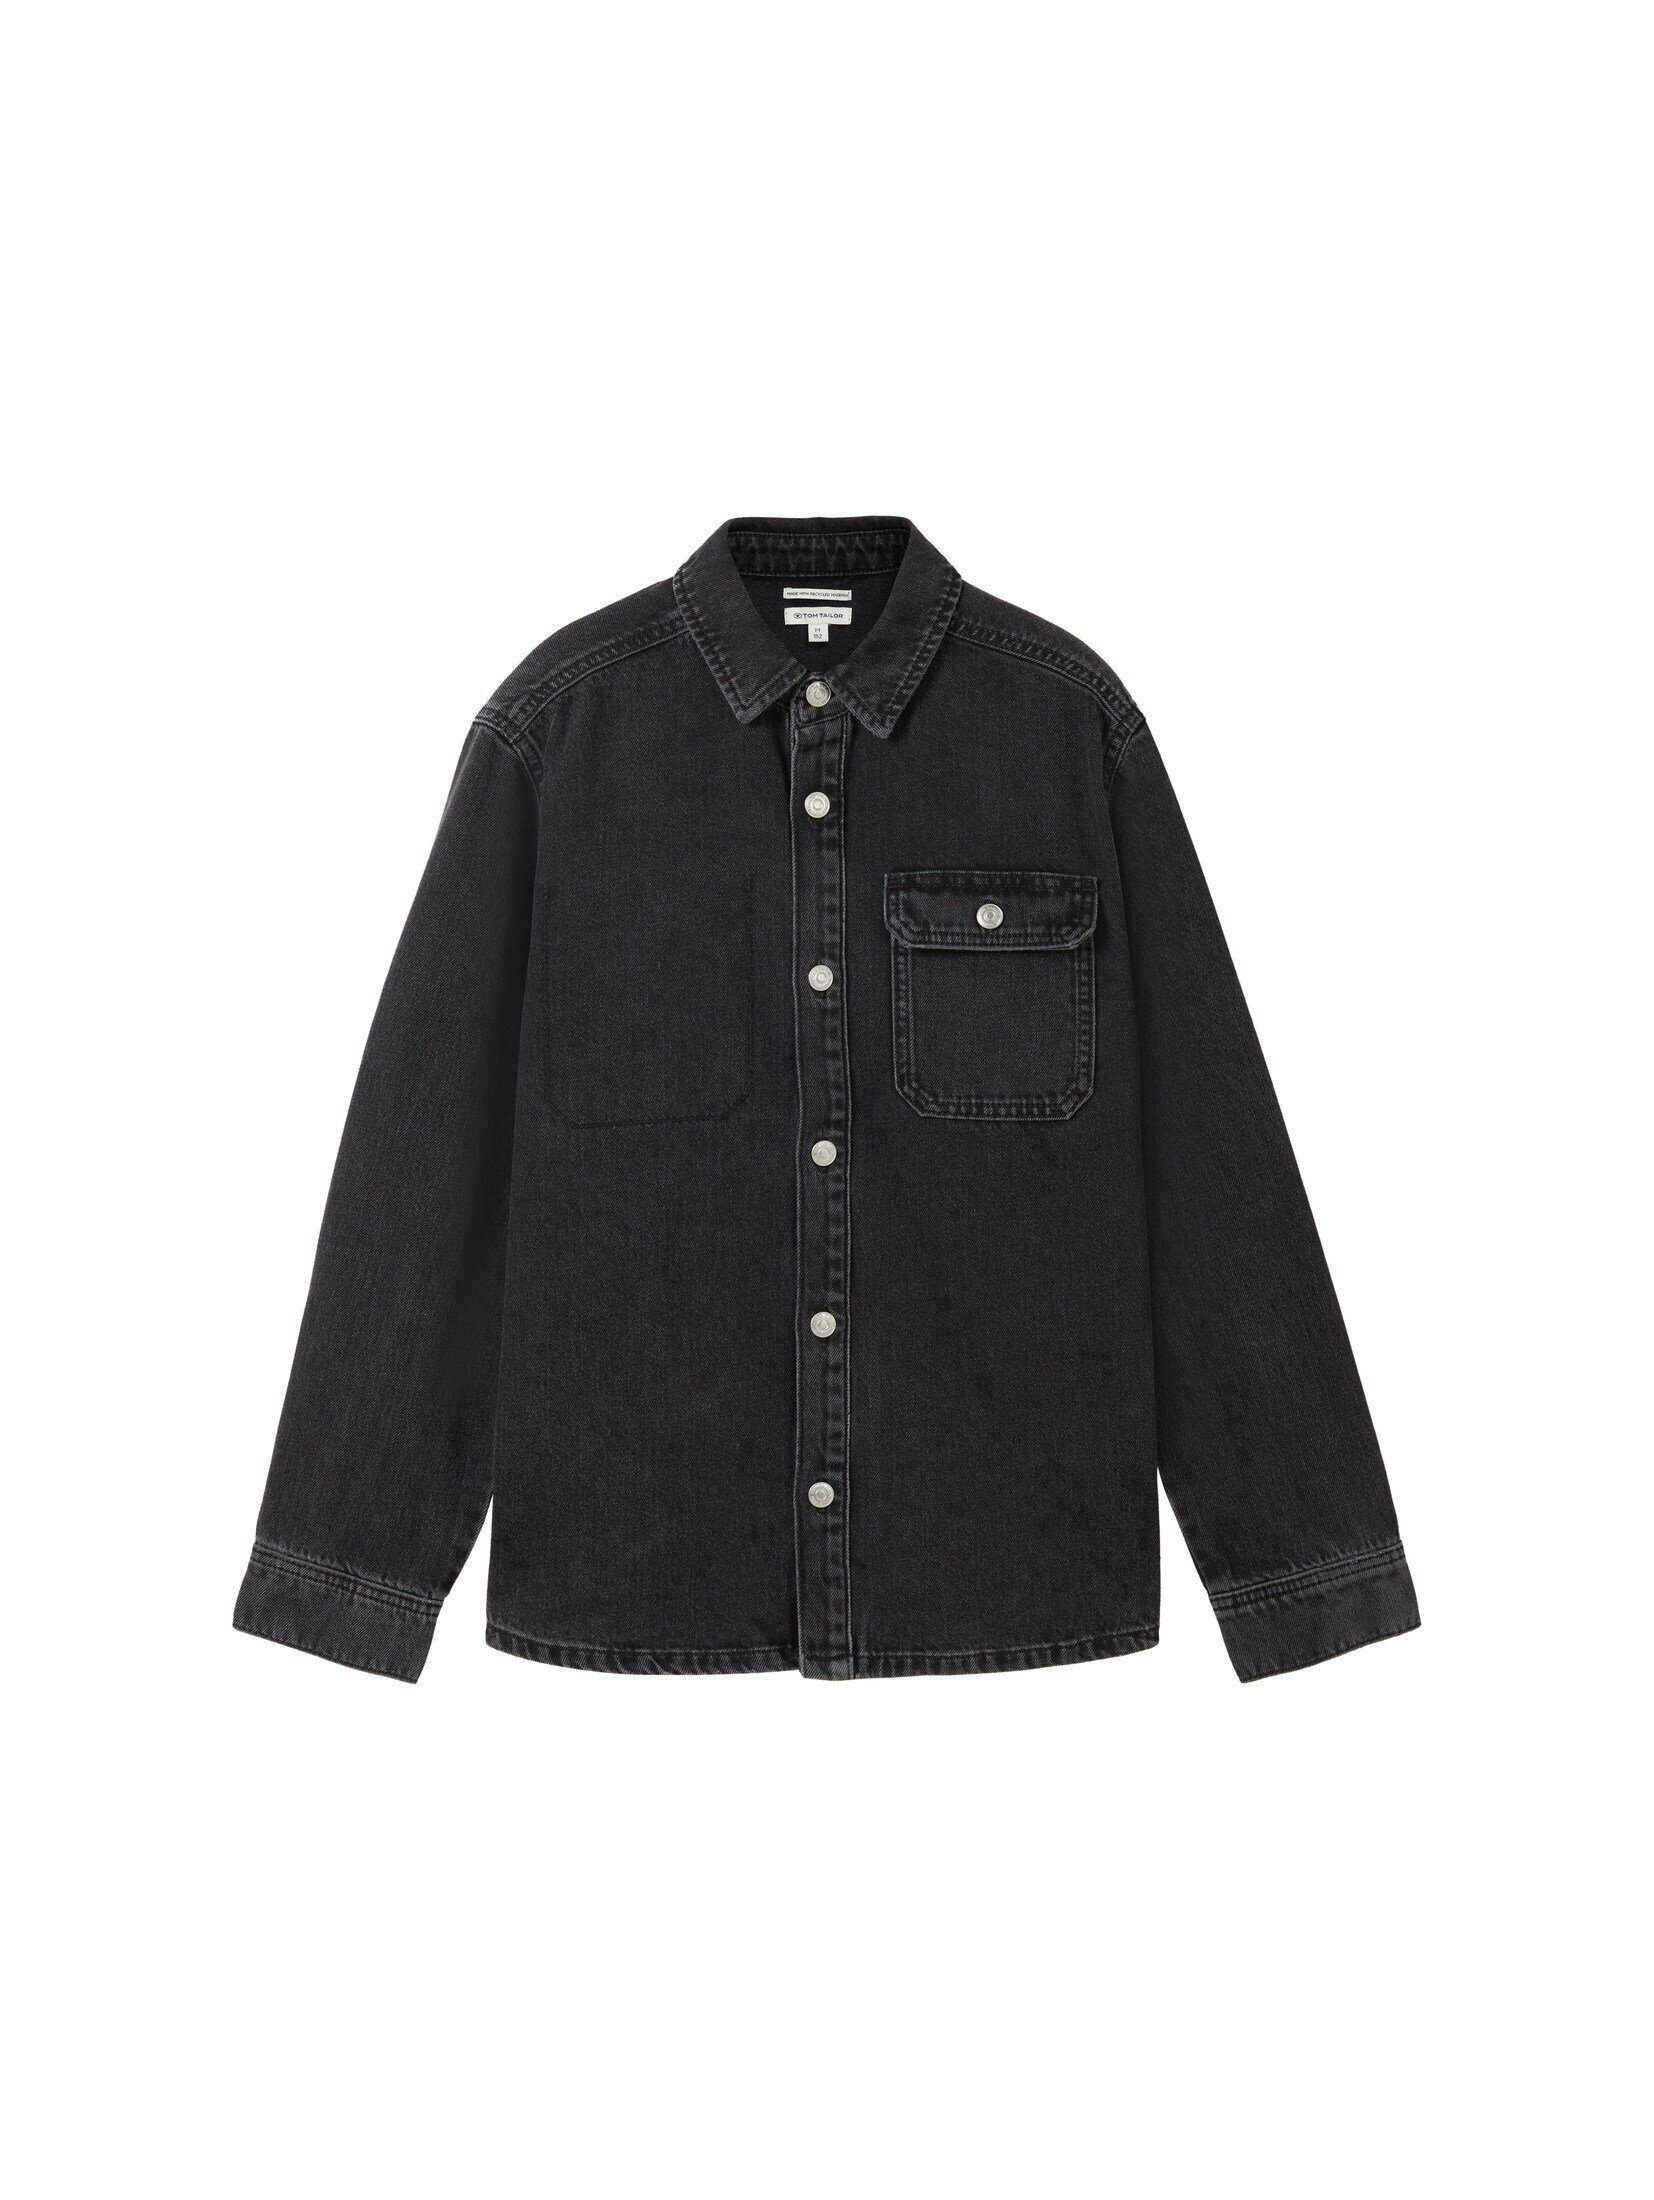 TOM TAILOR Langarmhemd Jeans Overshirt mit recycelter Baumwolle